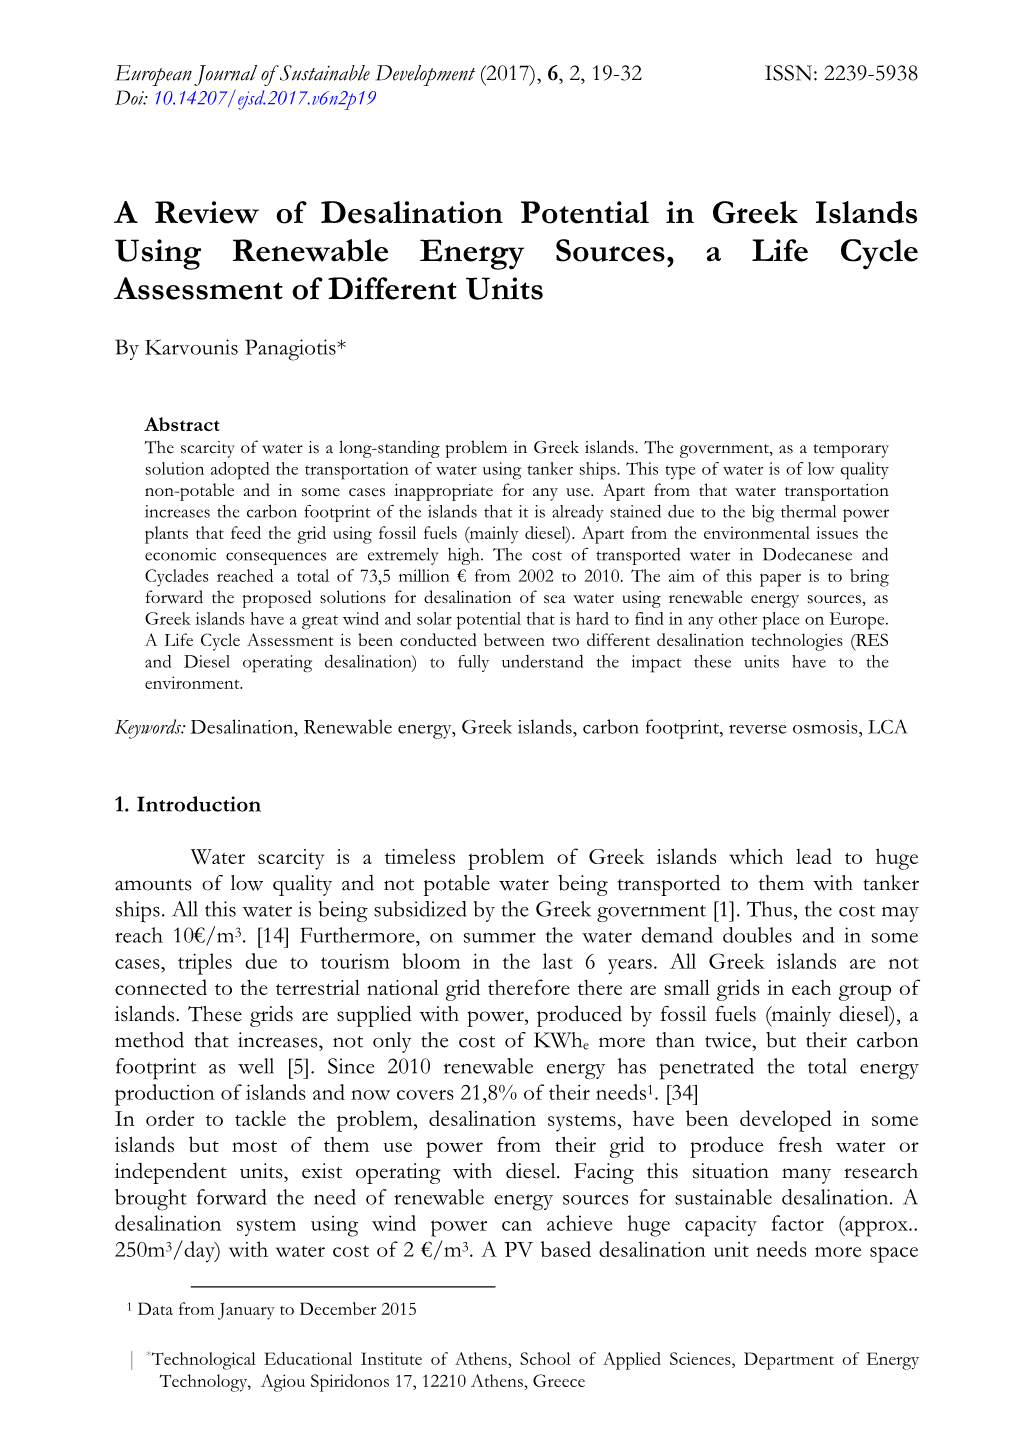 A Review of Desalination Potential in Greek Islands Using Renewable Energy Sources, a Life Cycle Assessment of Different Units